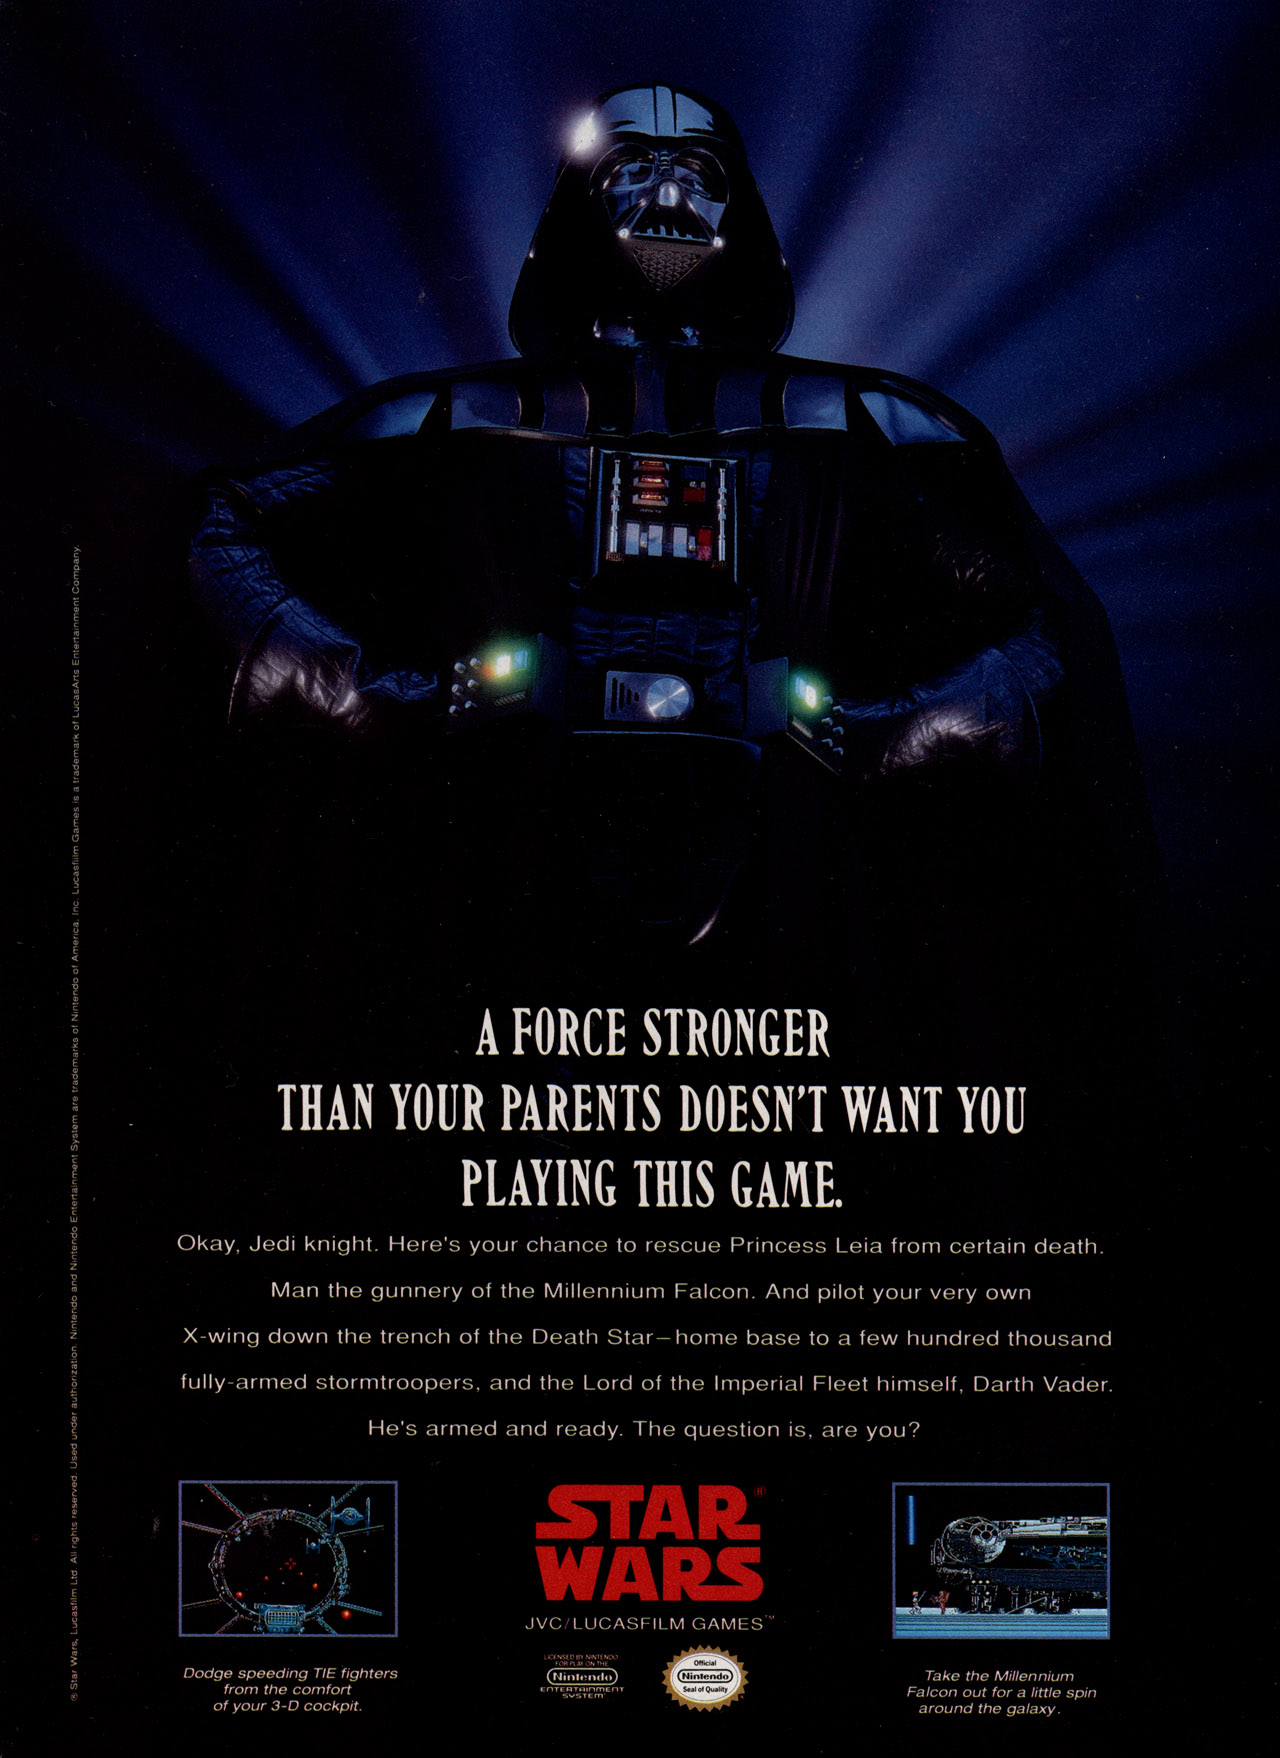 Developed here in Melbourne by Beam Software. While not the first Star Wars game to debut on Nintendo’s 8-bit system (a Namco developed game for the Famicom predates it), Beam […]